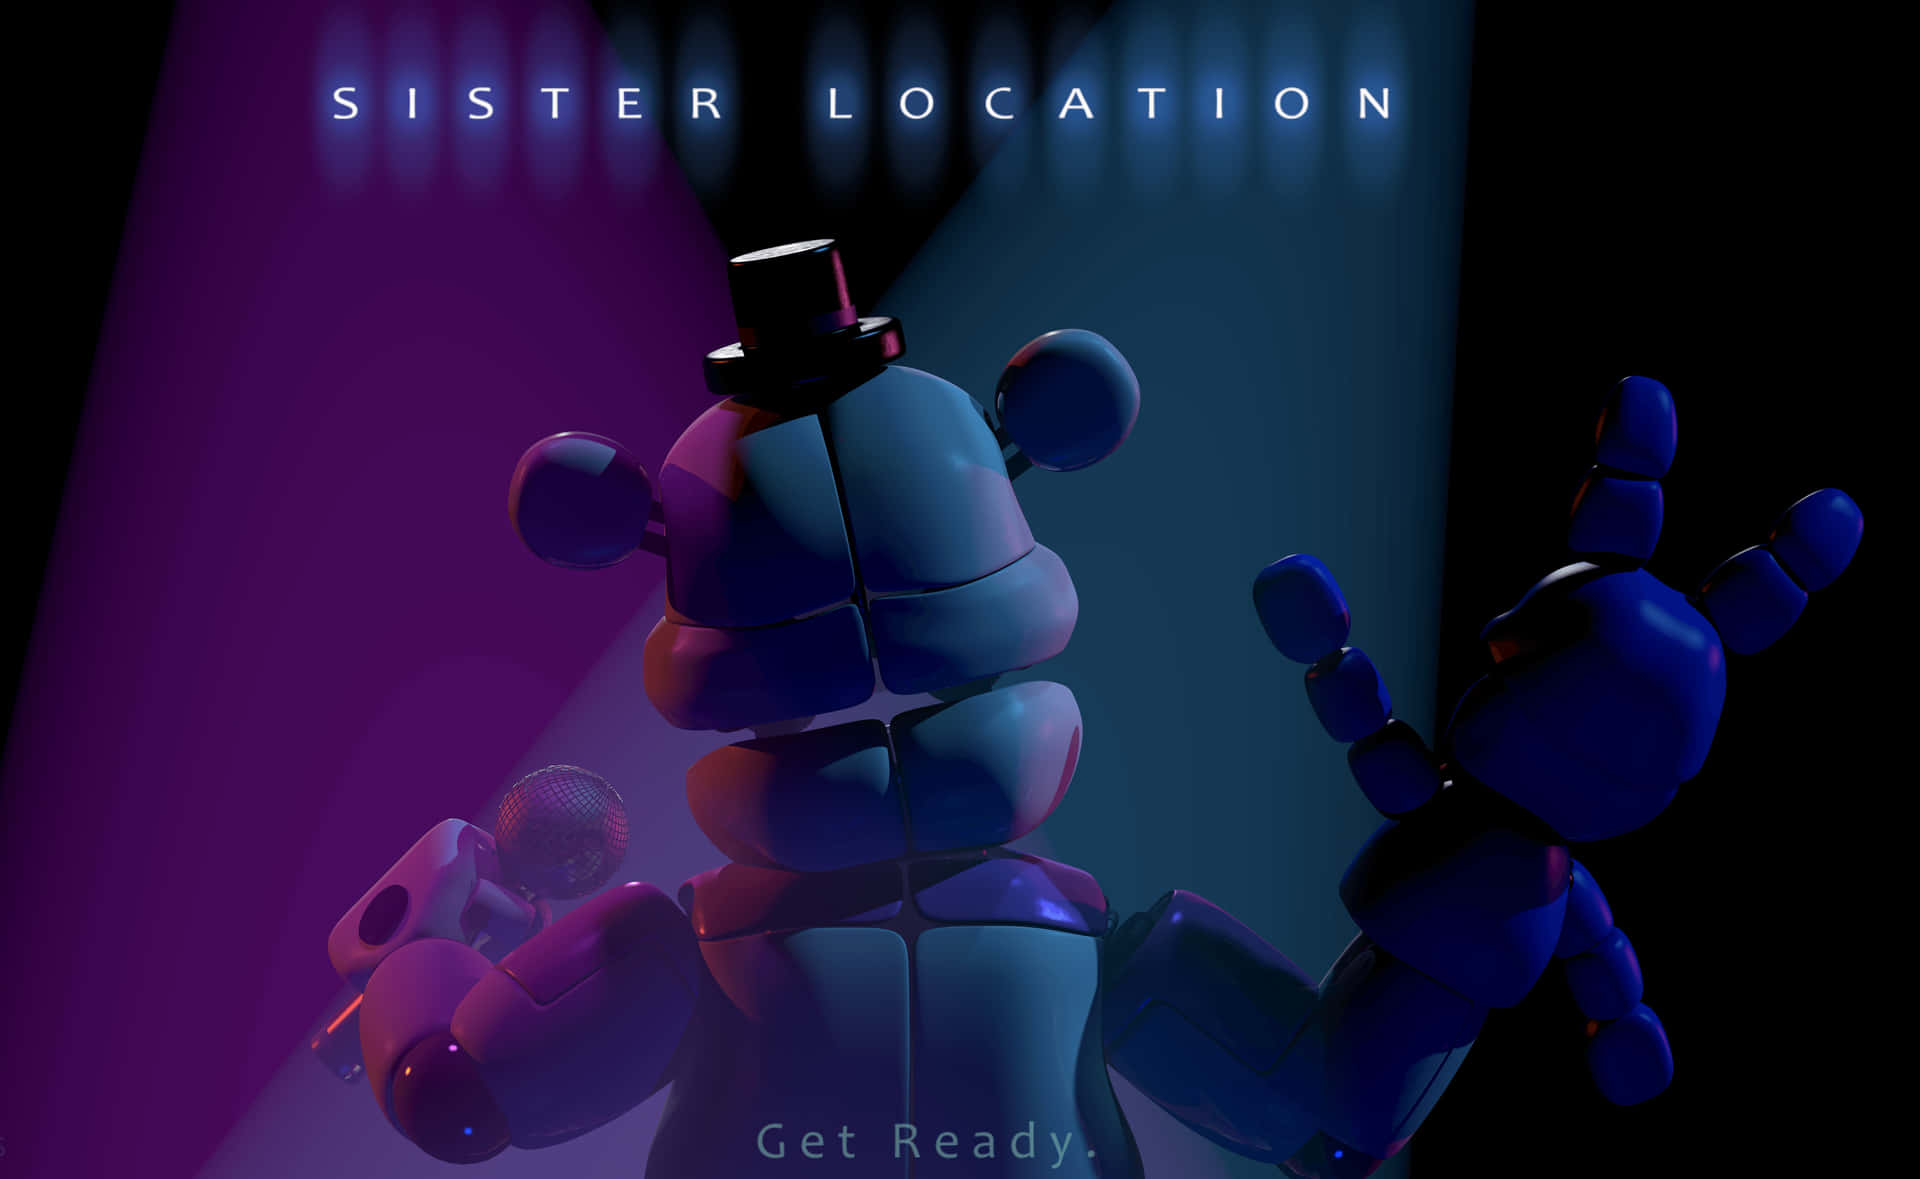 Funtime Freddy from Five Nights at Freddy's Wallpaper